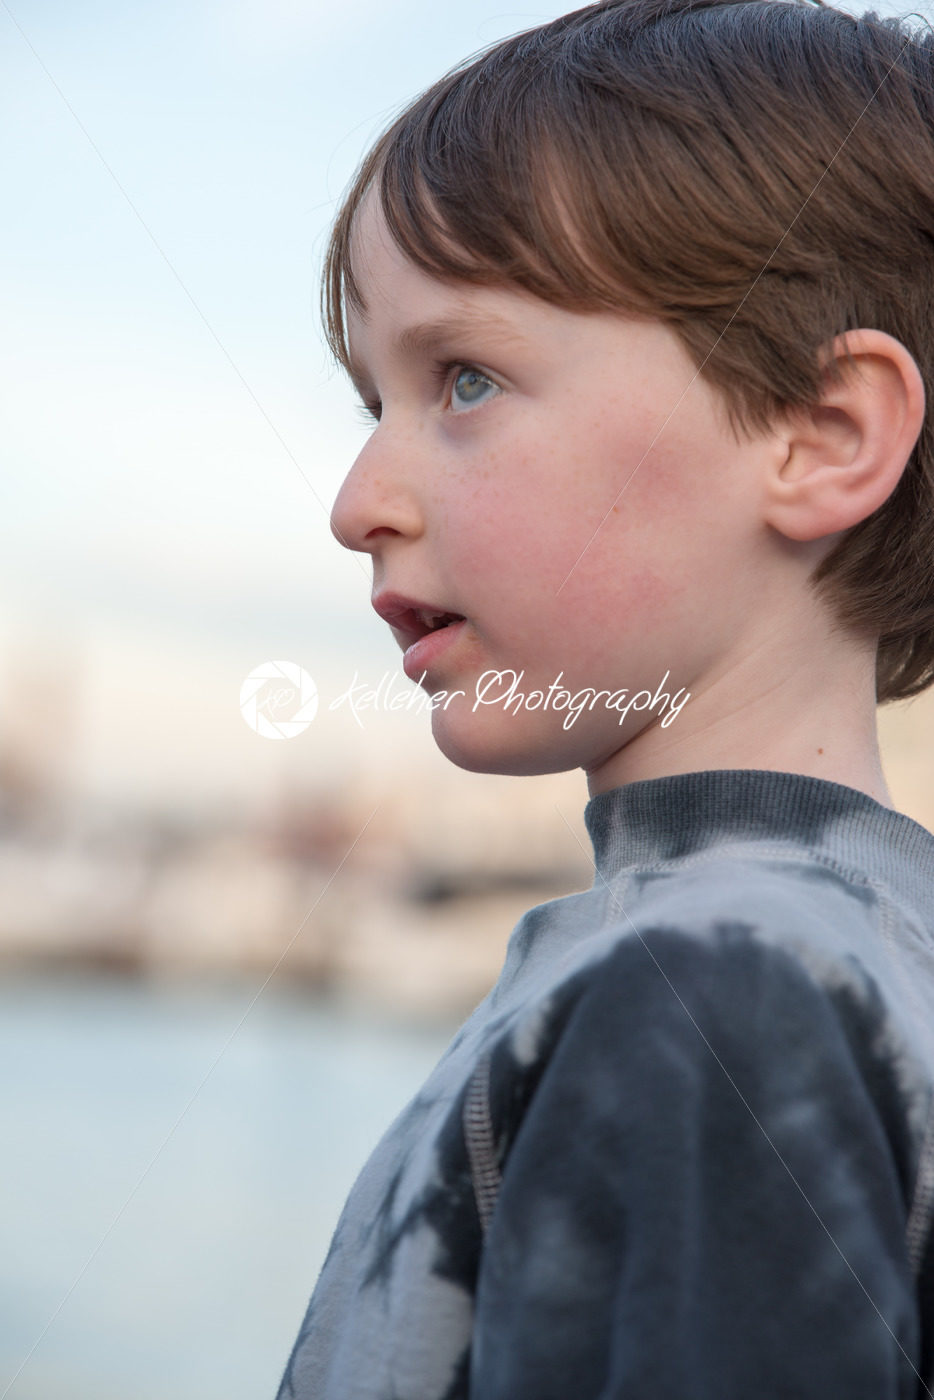 Young boy looking off into the distance - Kelleher Photography Store